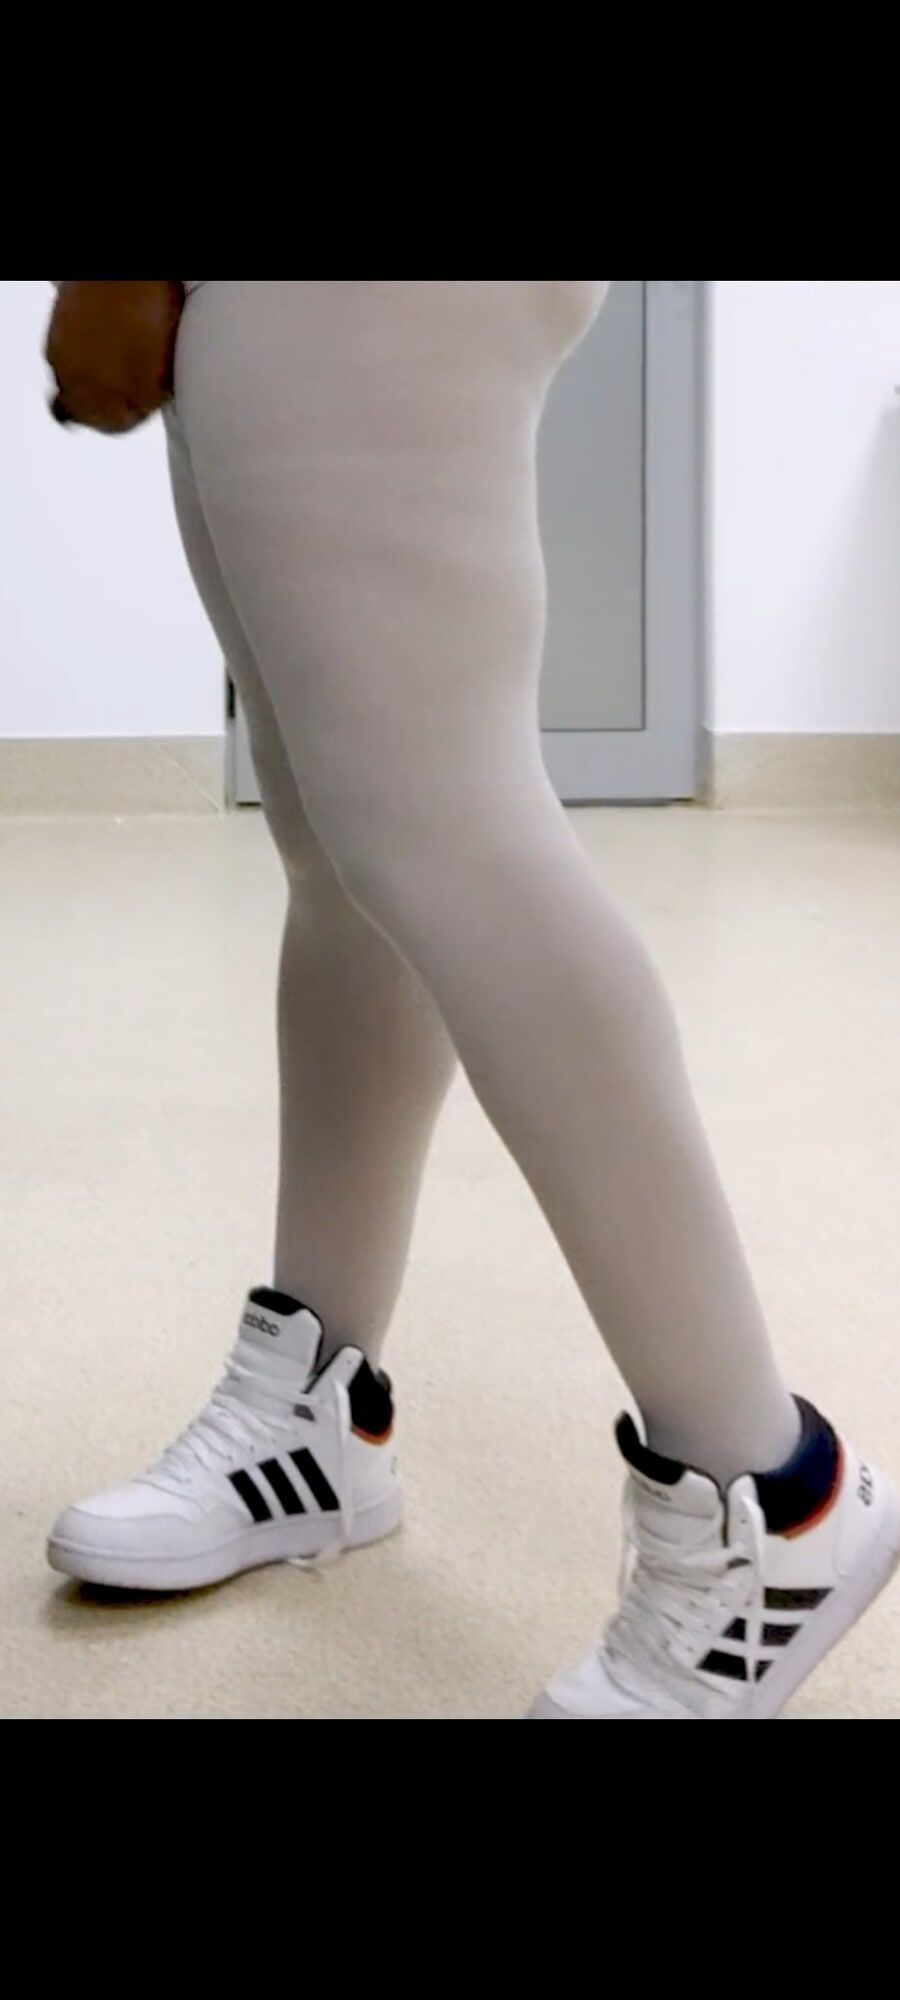 Legs in white pantyhose #5